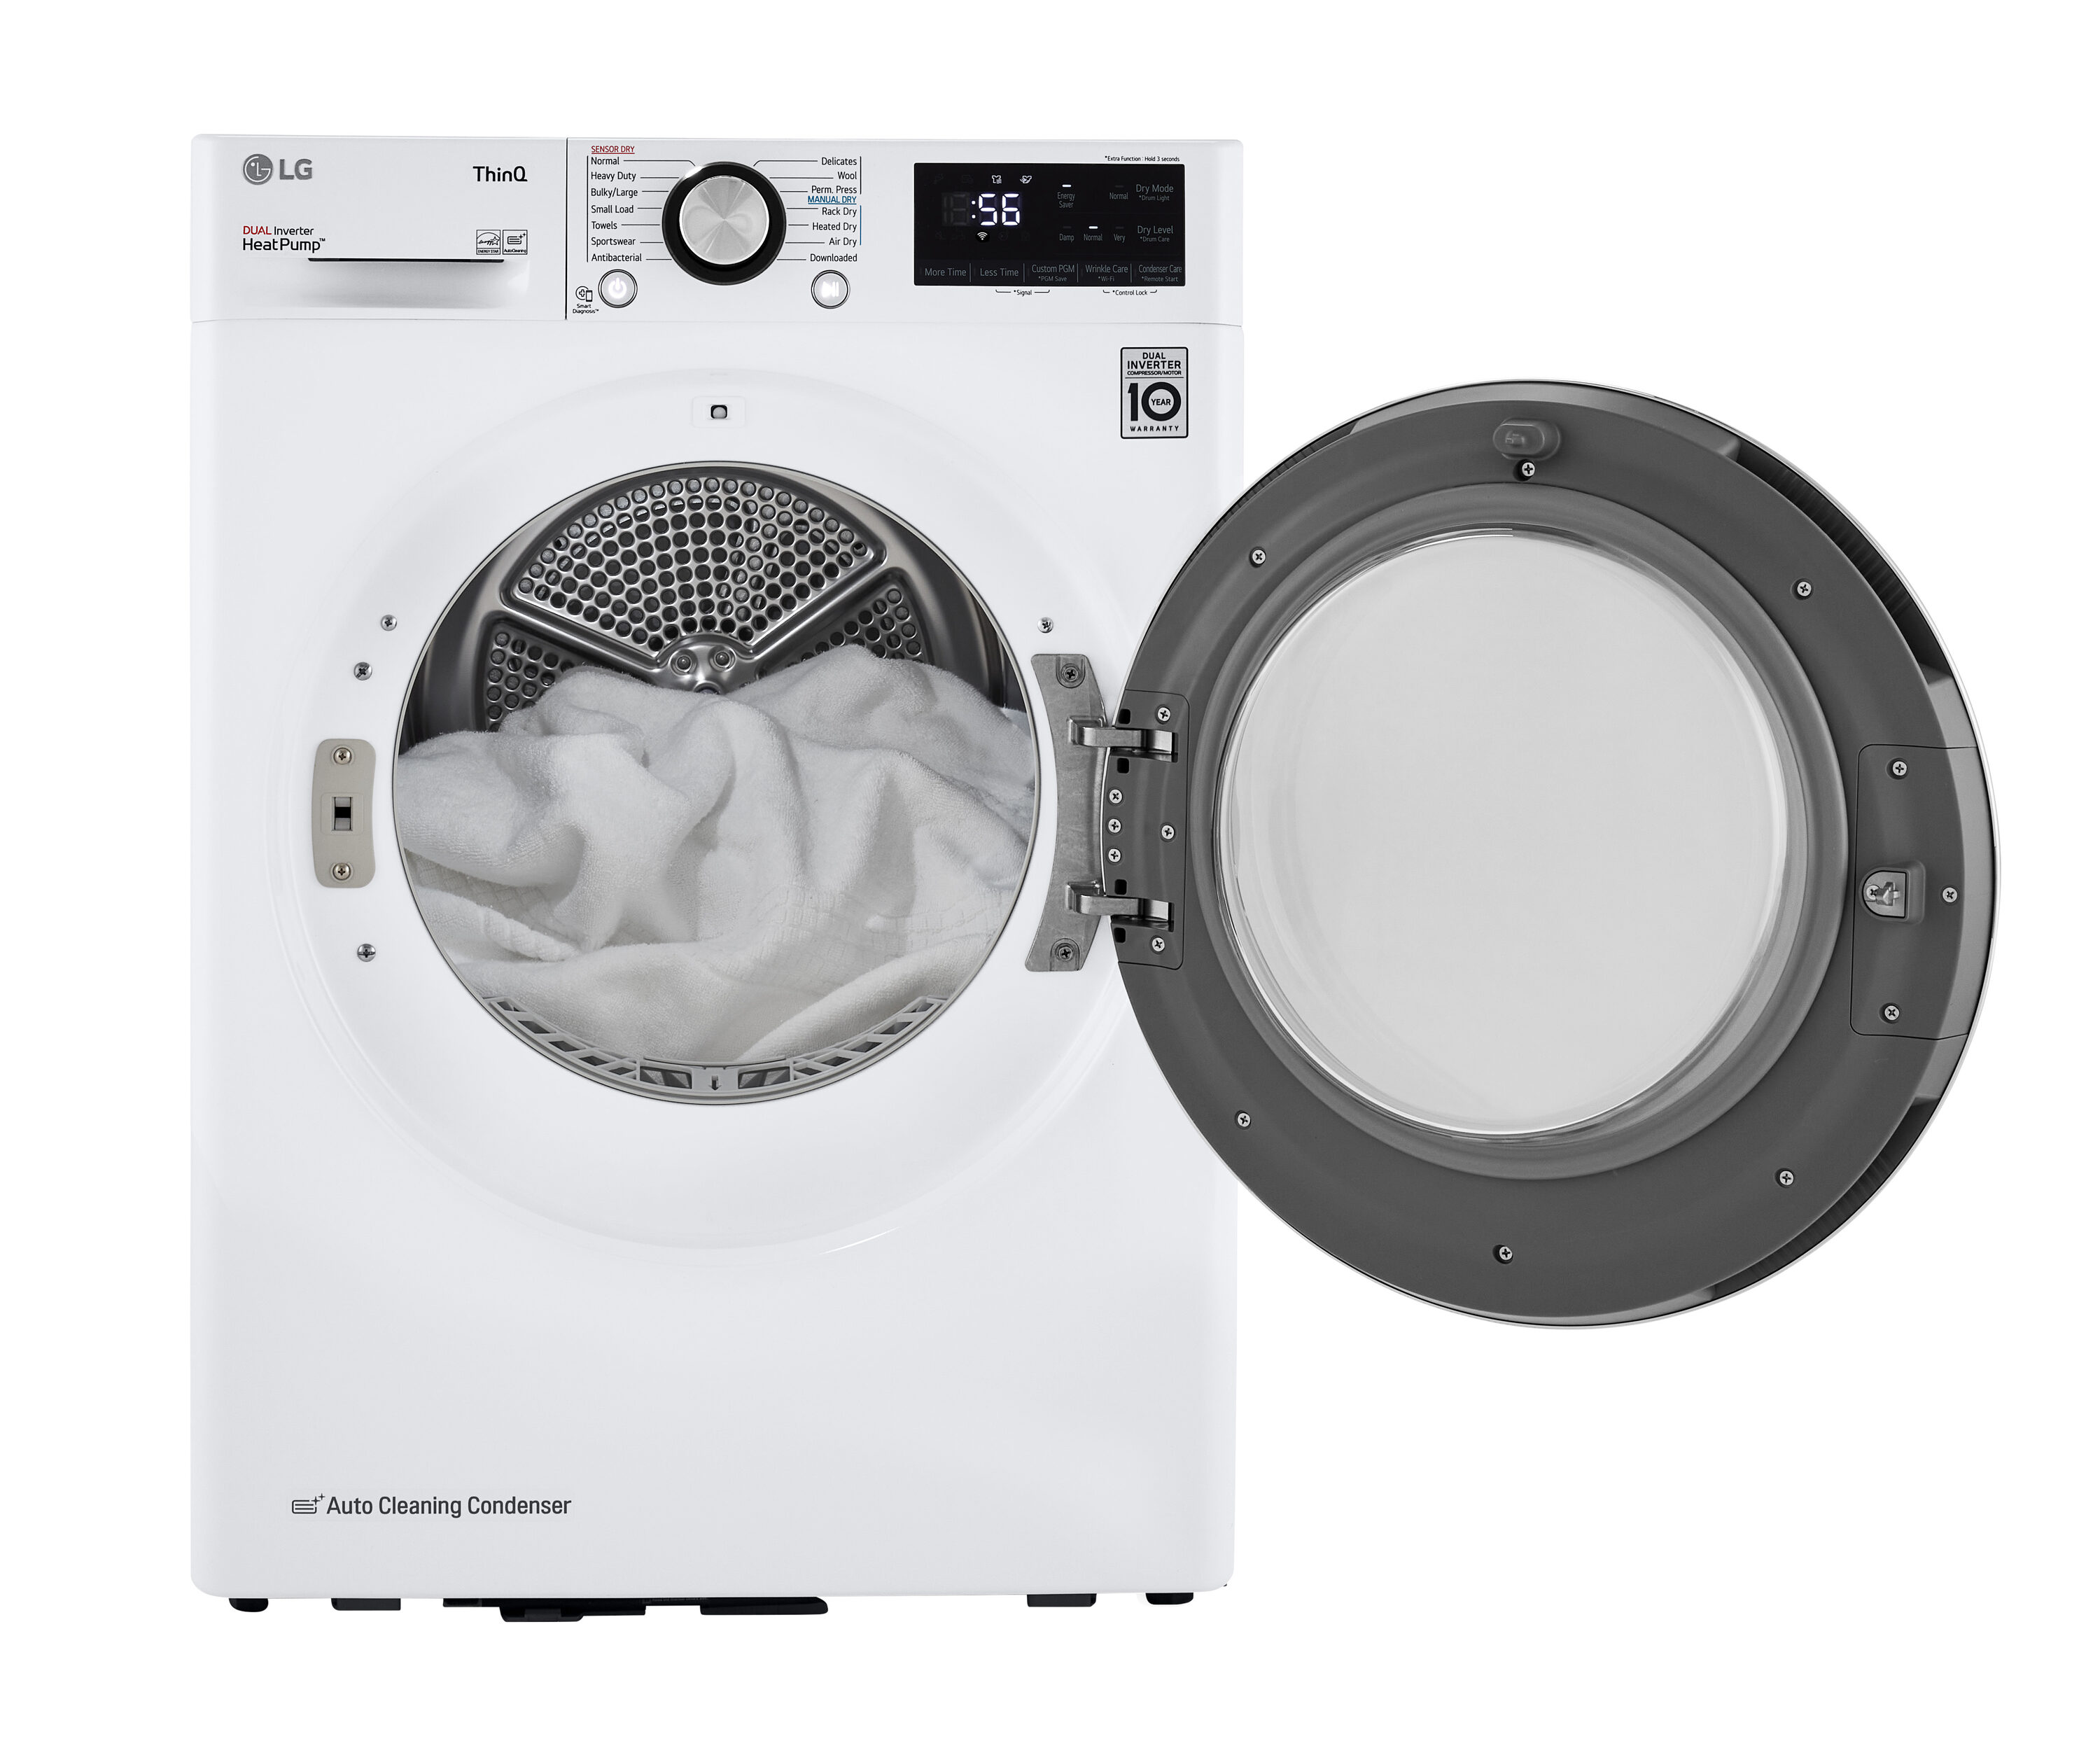 C Les Plumbing LLC - Install a Lint Catcher on Your Washing